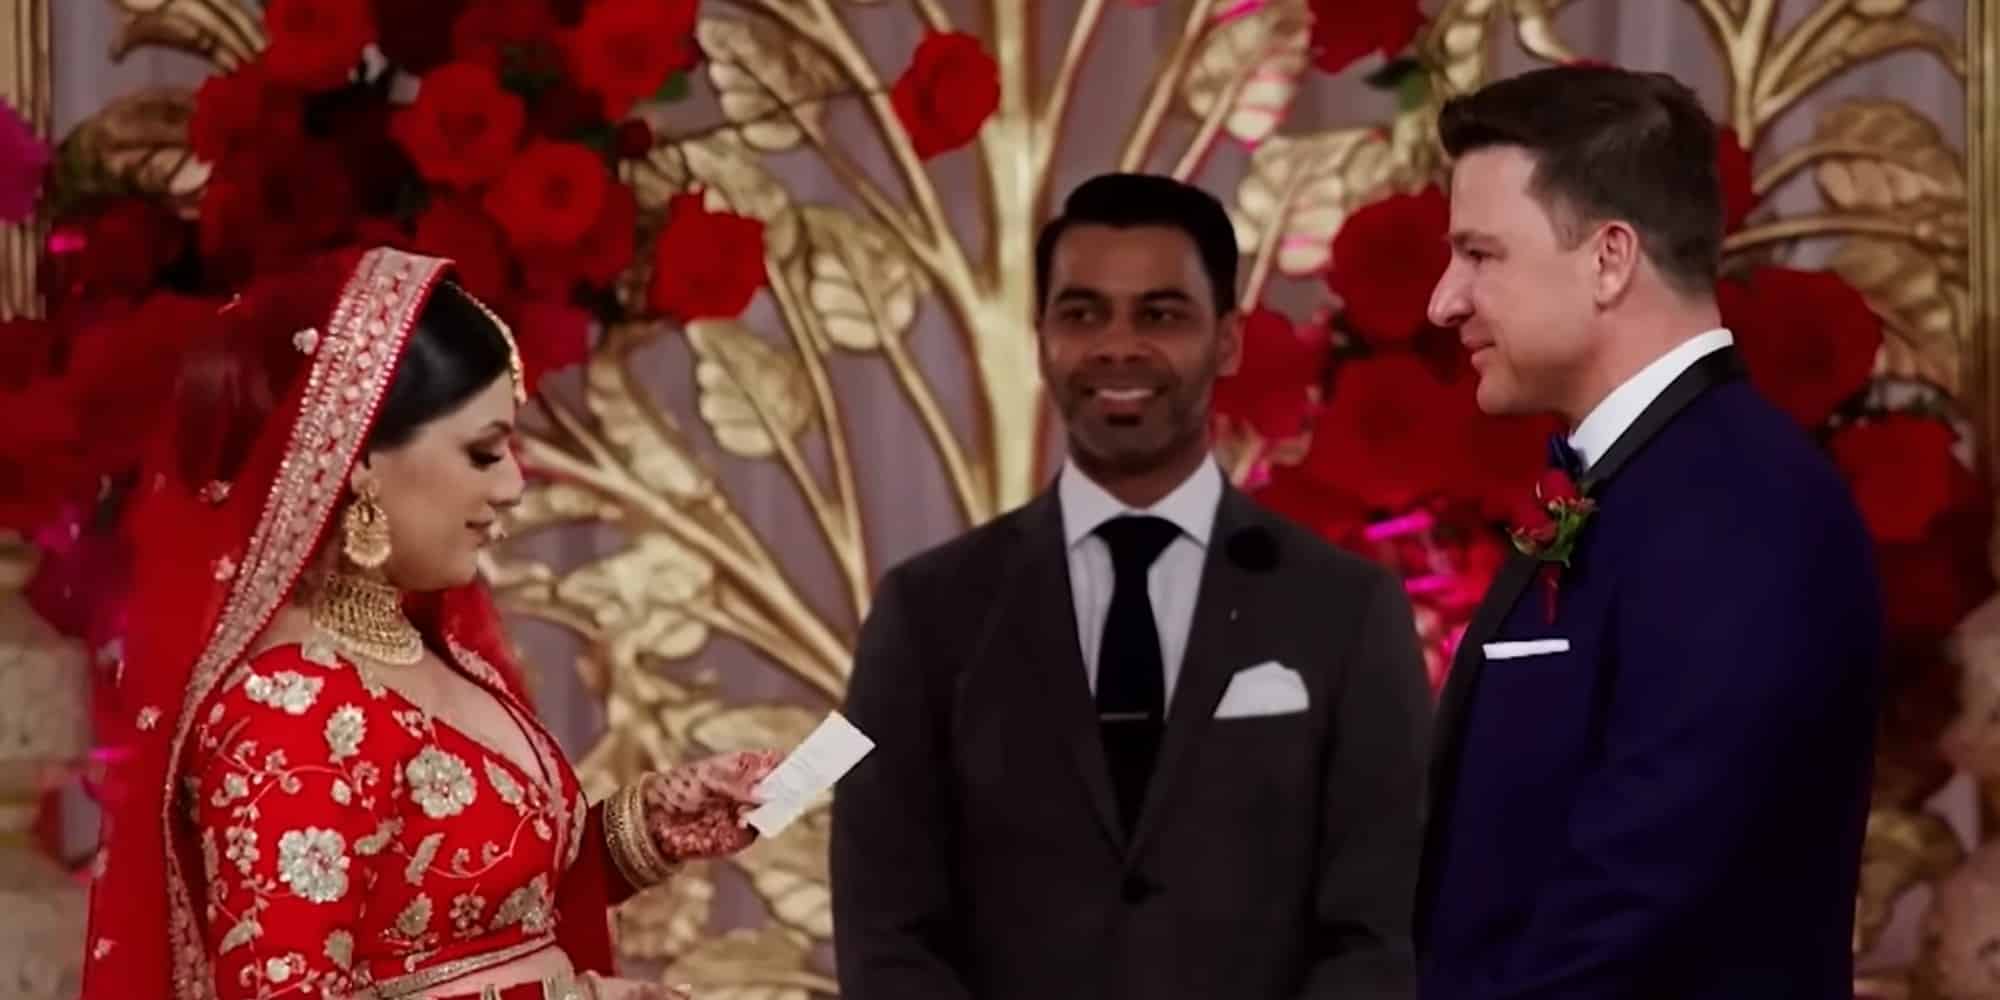 Married At First Sight Season 10 Episode 5 Release Date